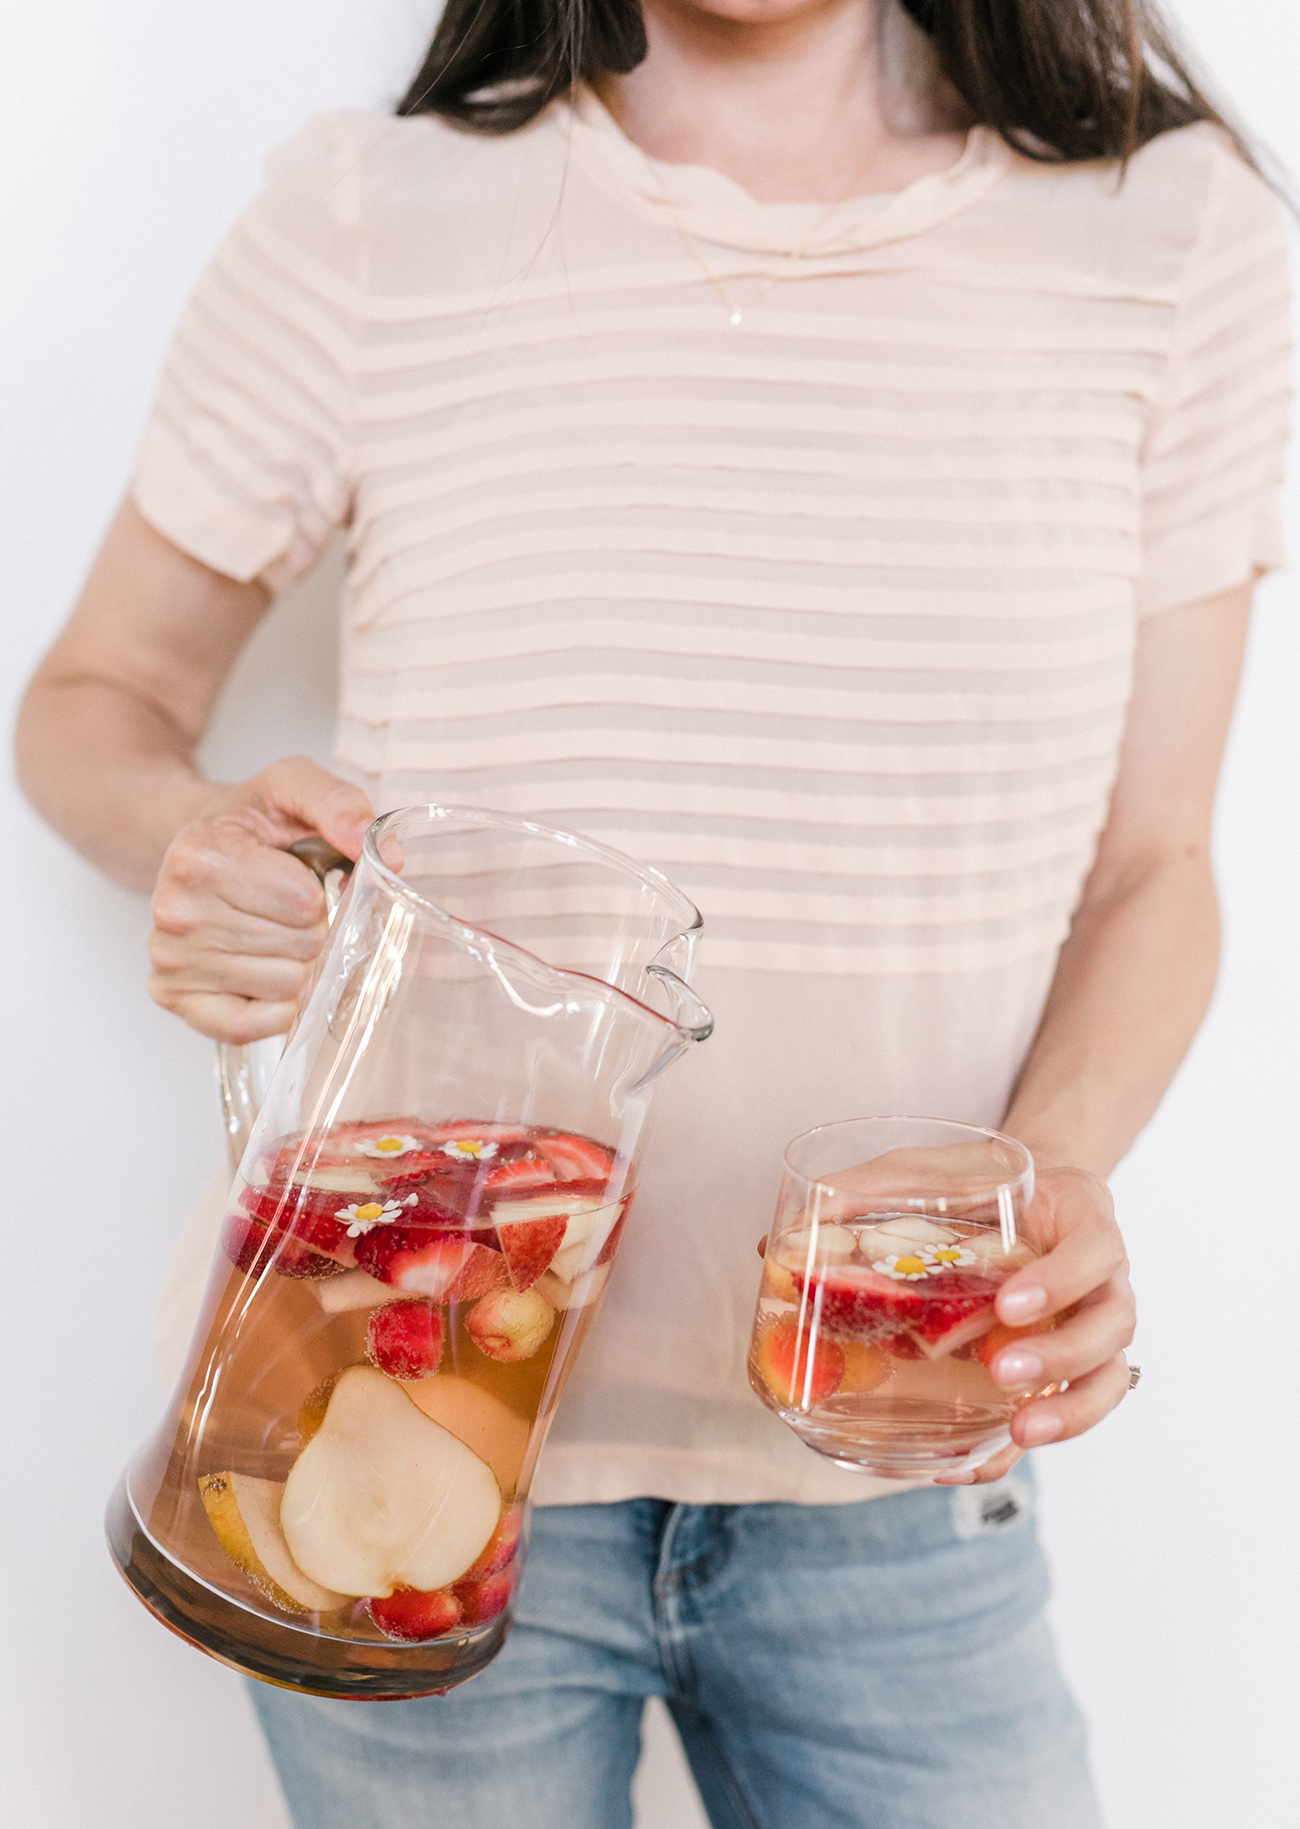 Rosé Sangria with Cherries and Strawberries